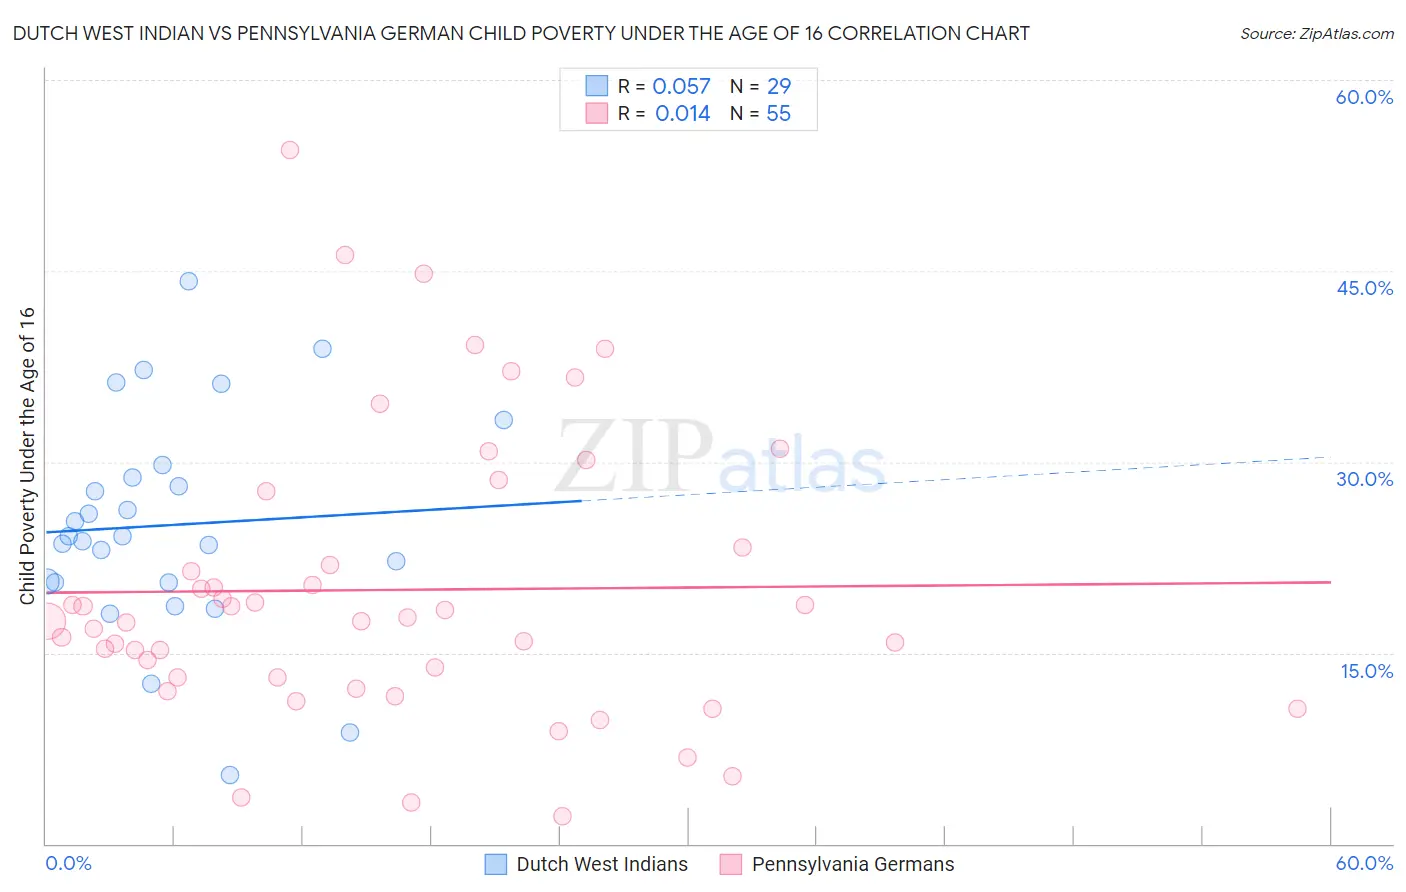 Dutch West Indian vs Pennsylvania German Child Poverty Under the Age of 16